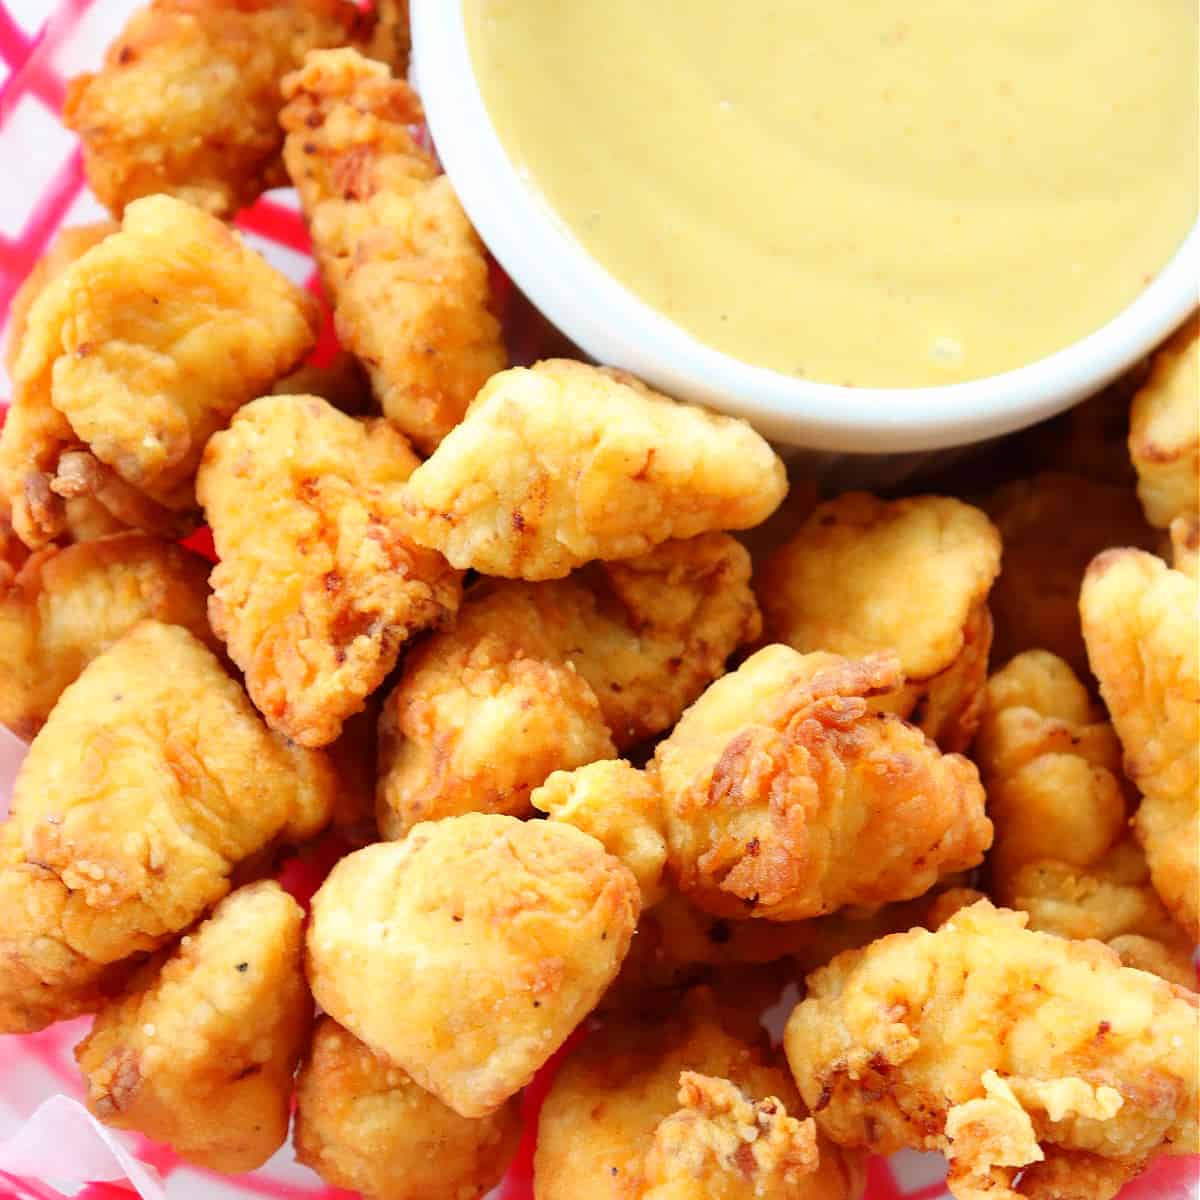 Chick-fil-A nuggets in basket.